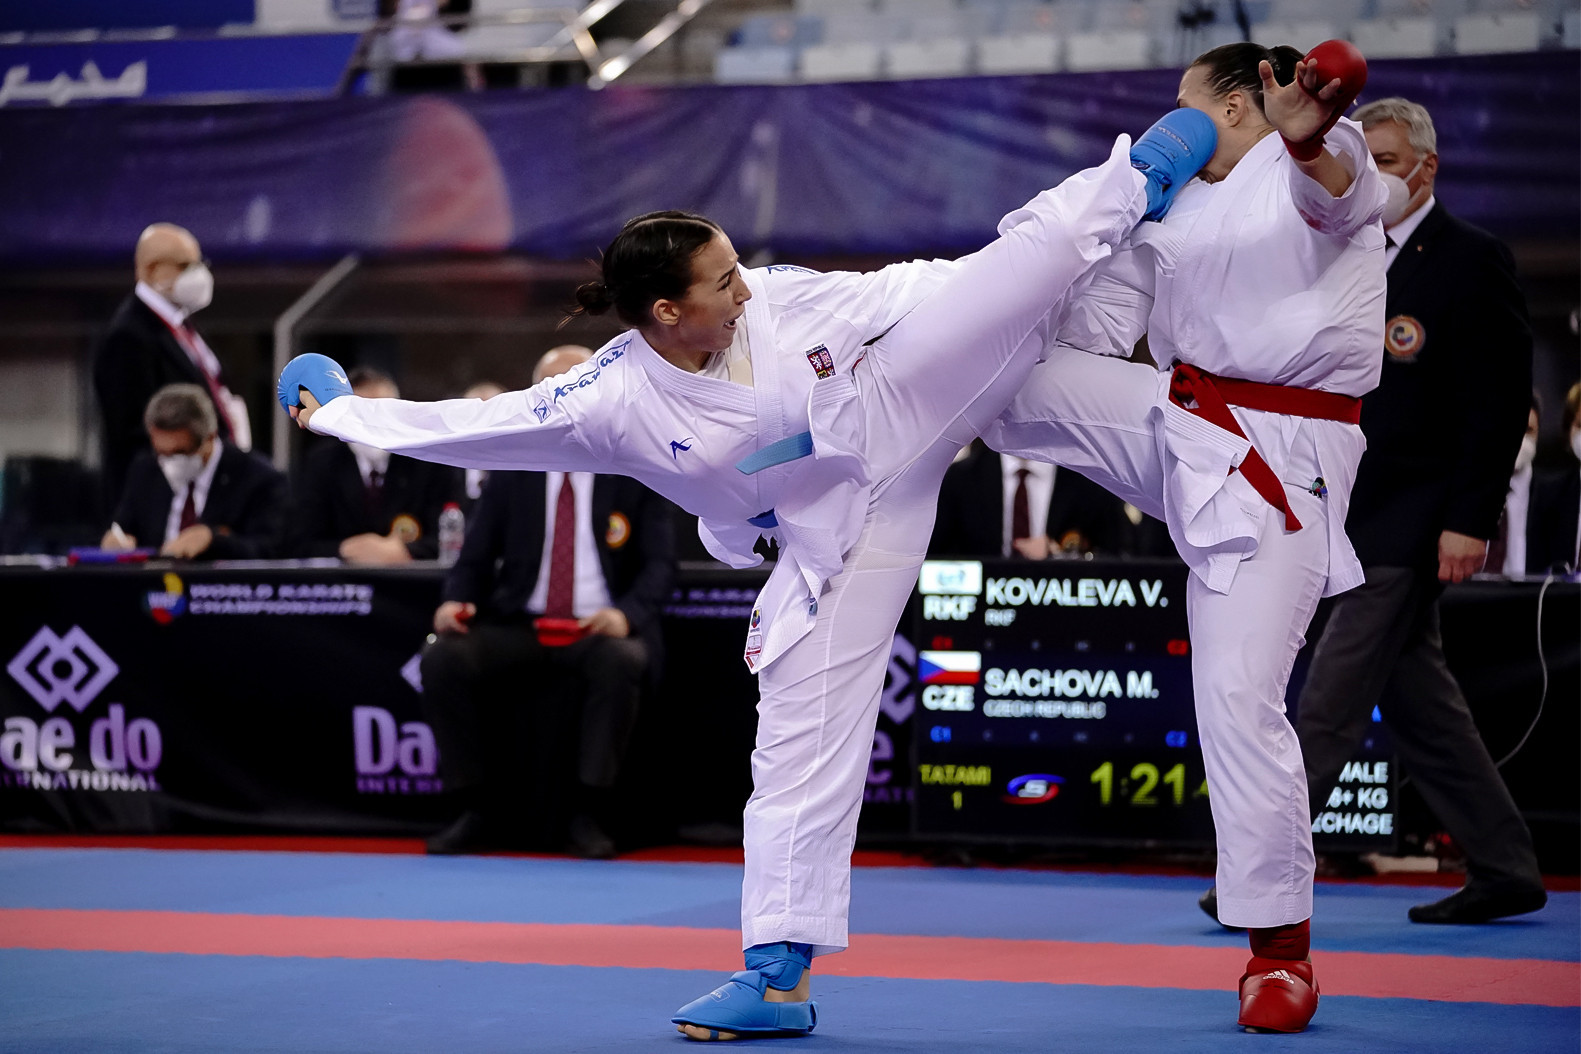 Repechage bouts were held to decide who will face the losing semi-finalists for bronze ©WKF